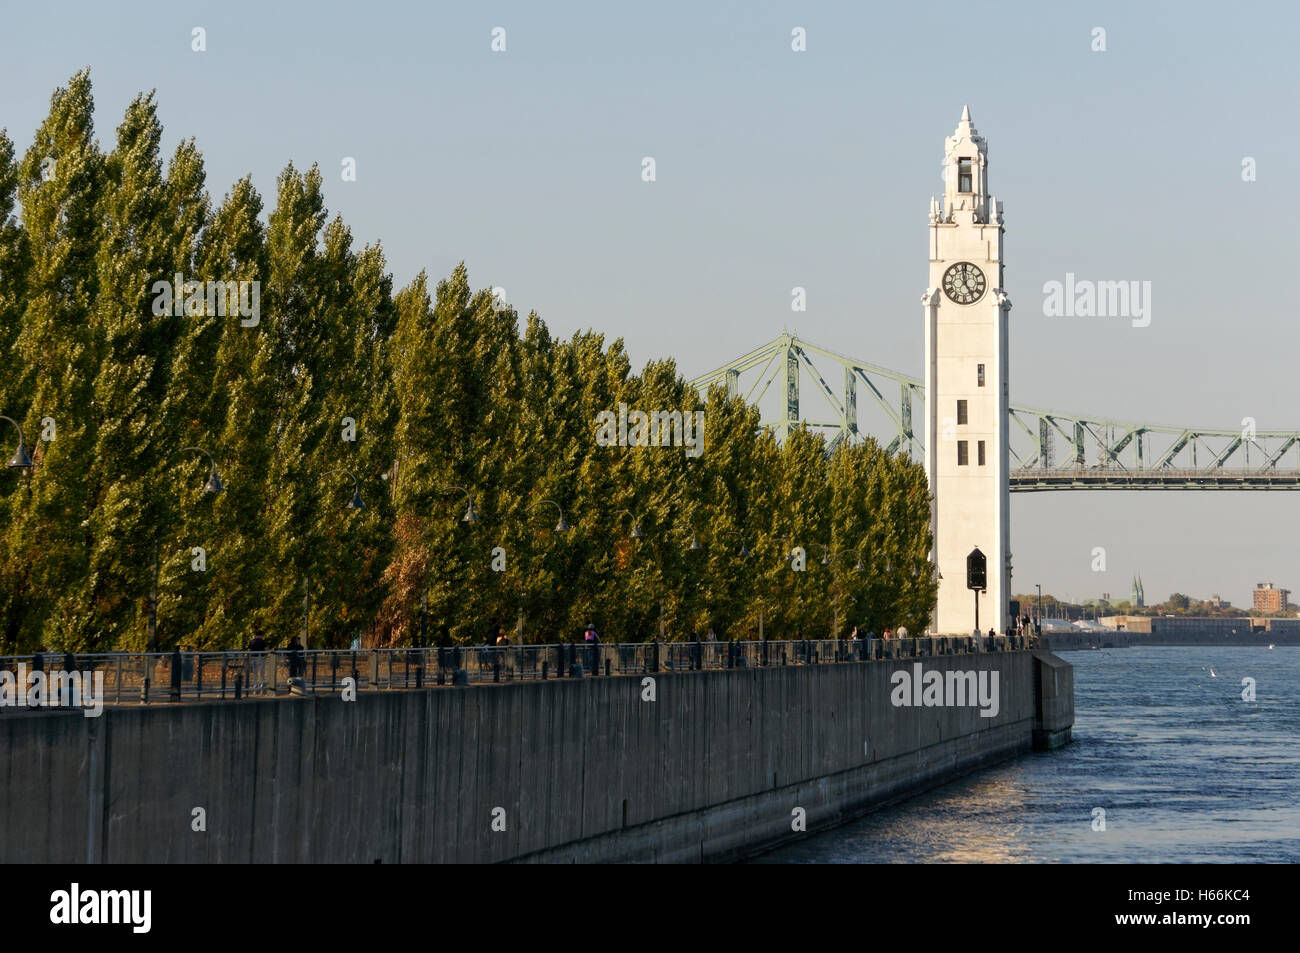 The Clock Tower located on Quai de Horloge with the Jacques Cartier Bridge in back, Old Port of Montreal, Quebec, Canada Stock Photo